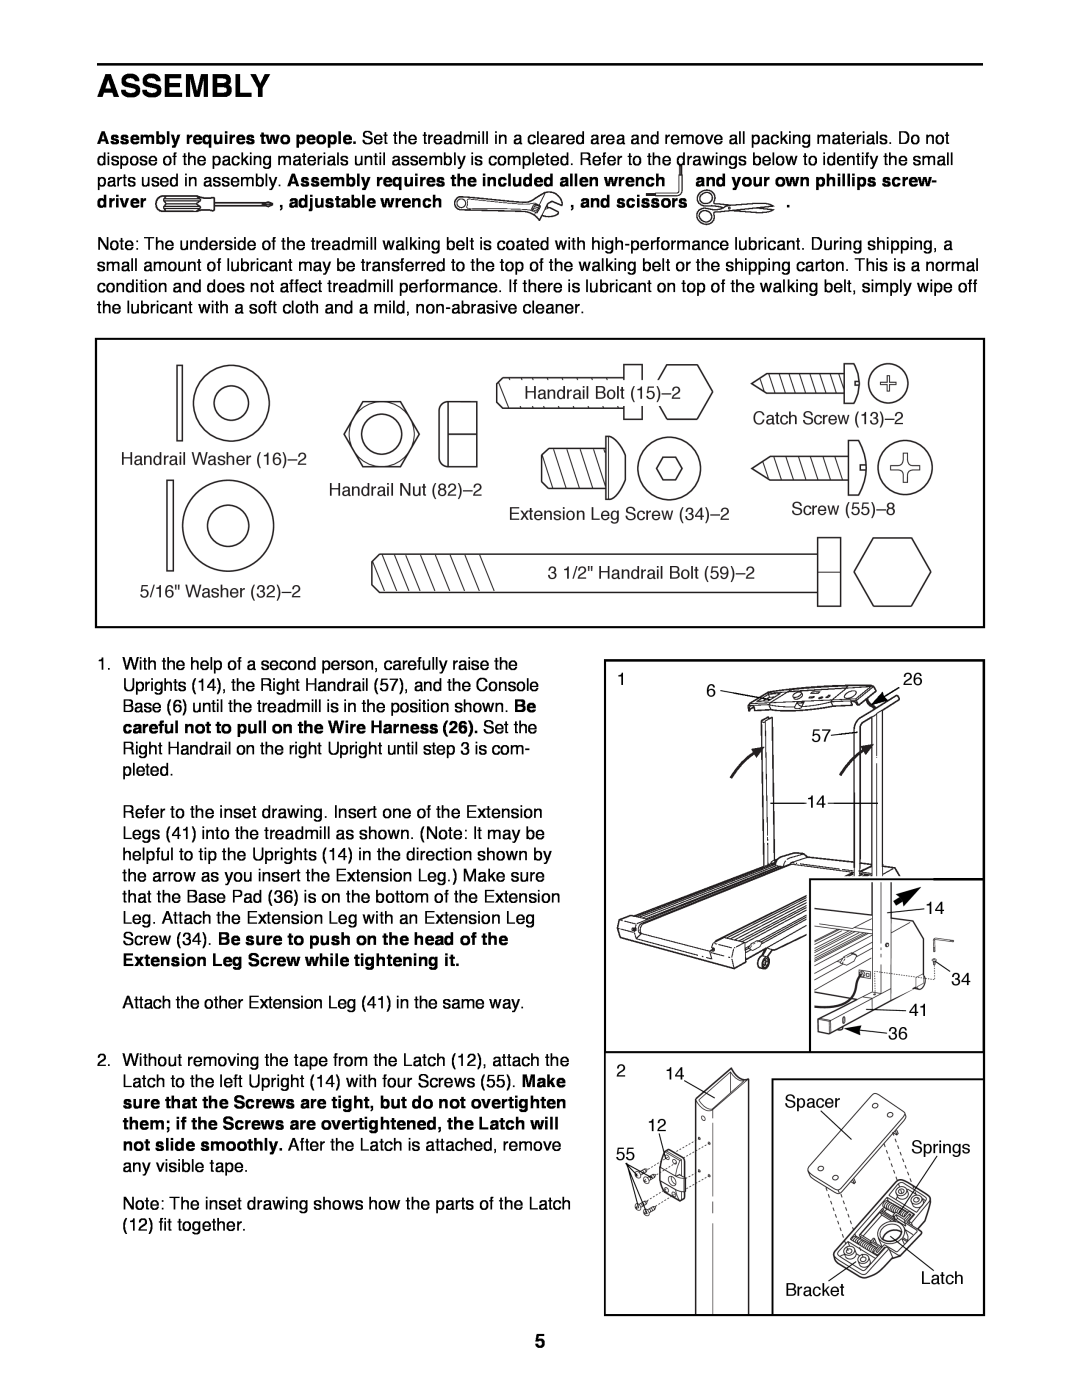 ProForm PFTL39191 user manual Assembly, driver , adjustable wrench , and scissors, Extension Leg Screw while tightening it 